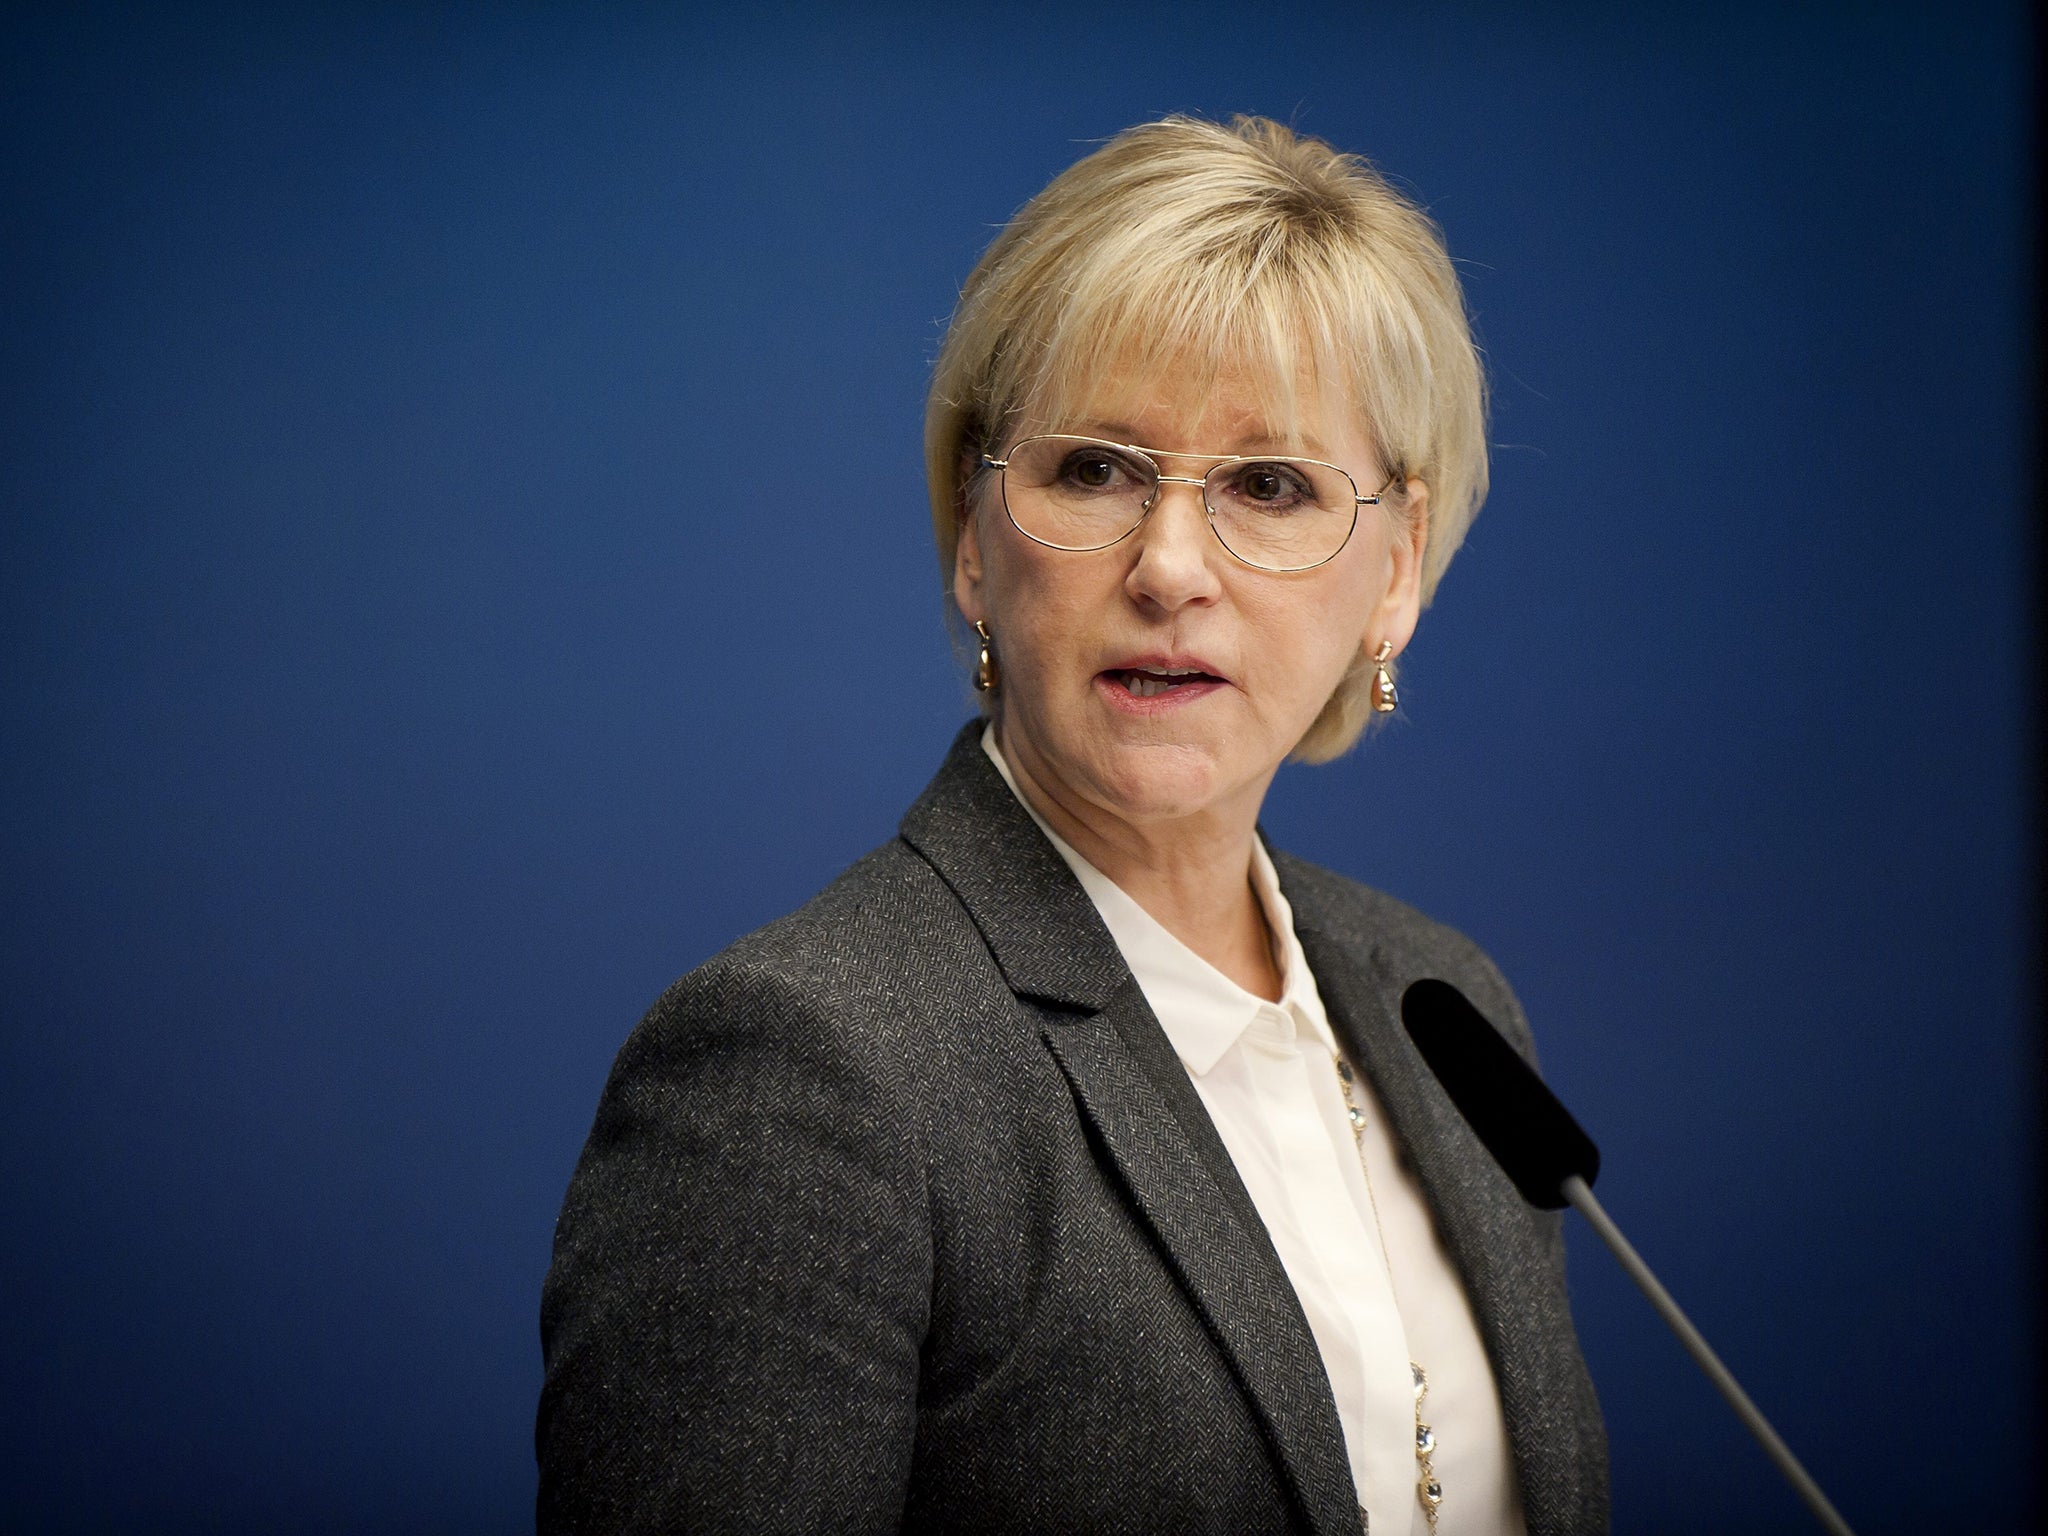 Sweden cancelled the deal shortly after its foreign minister Margot Wallstrom was barred from addressing the Arab League in Cairo after protests from Saudi delegates earlier this week